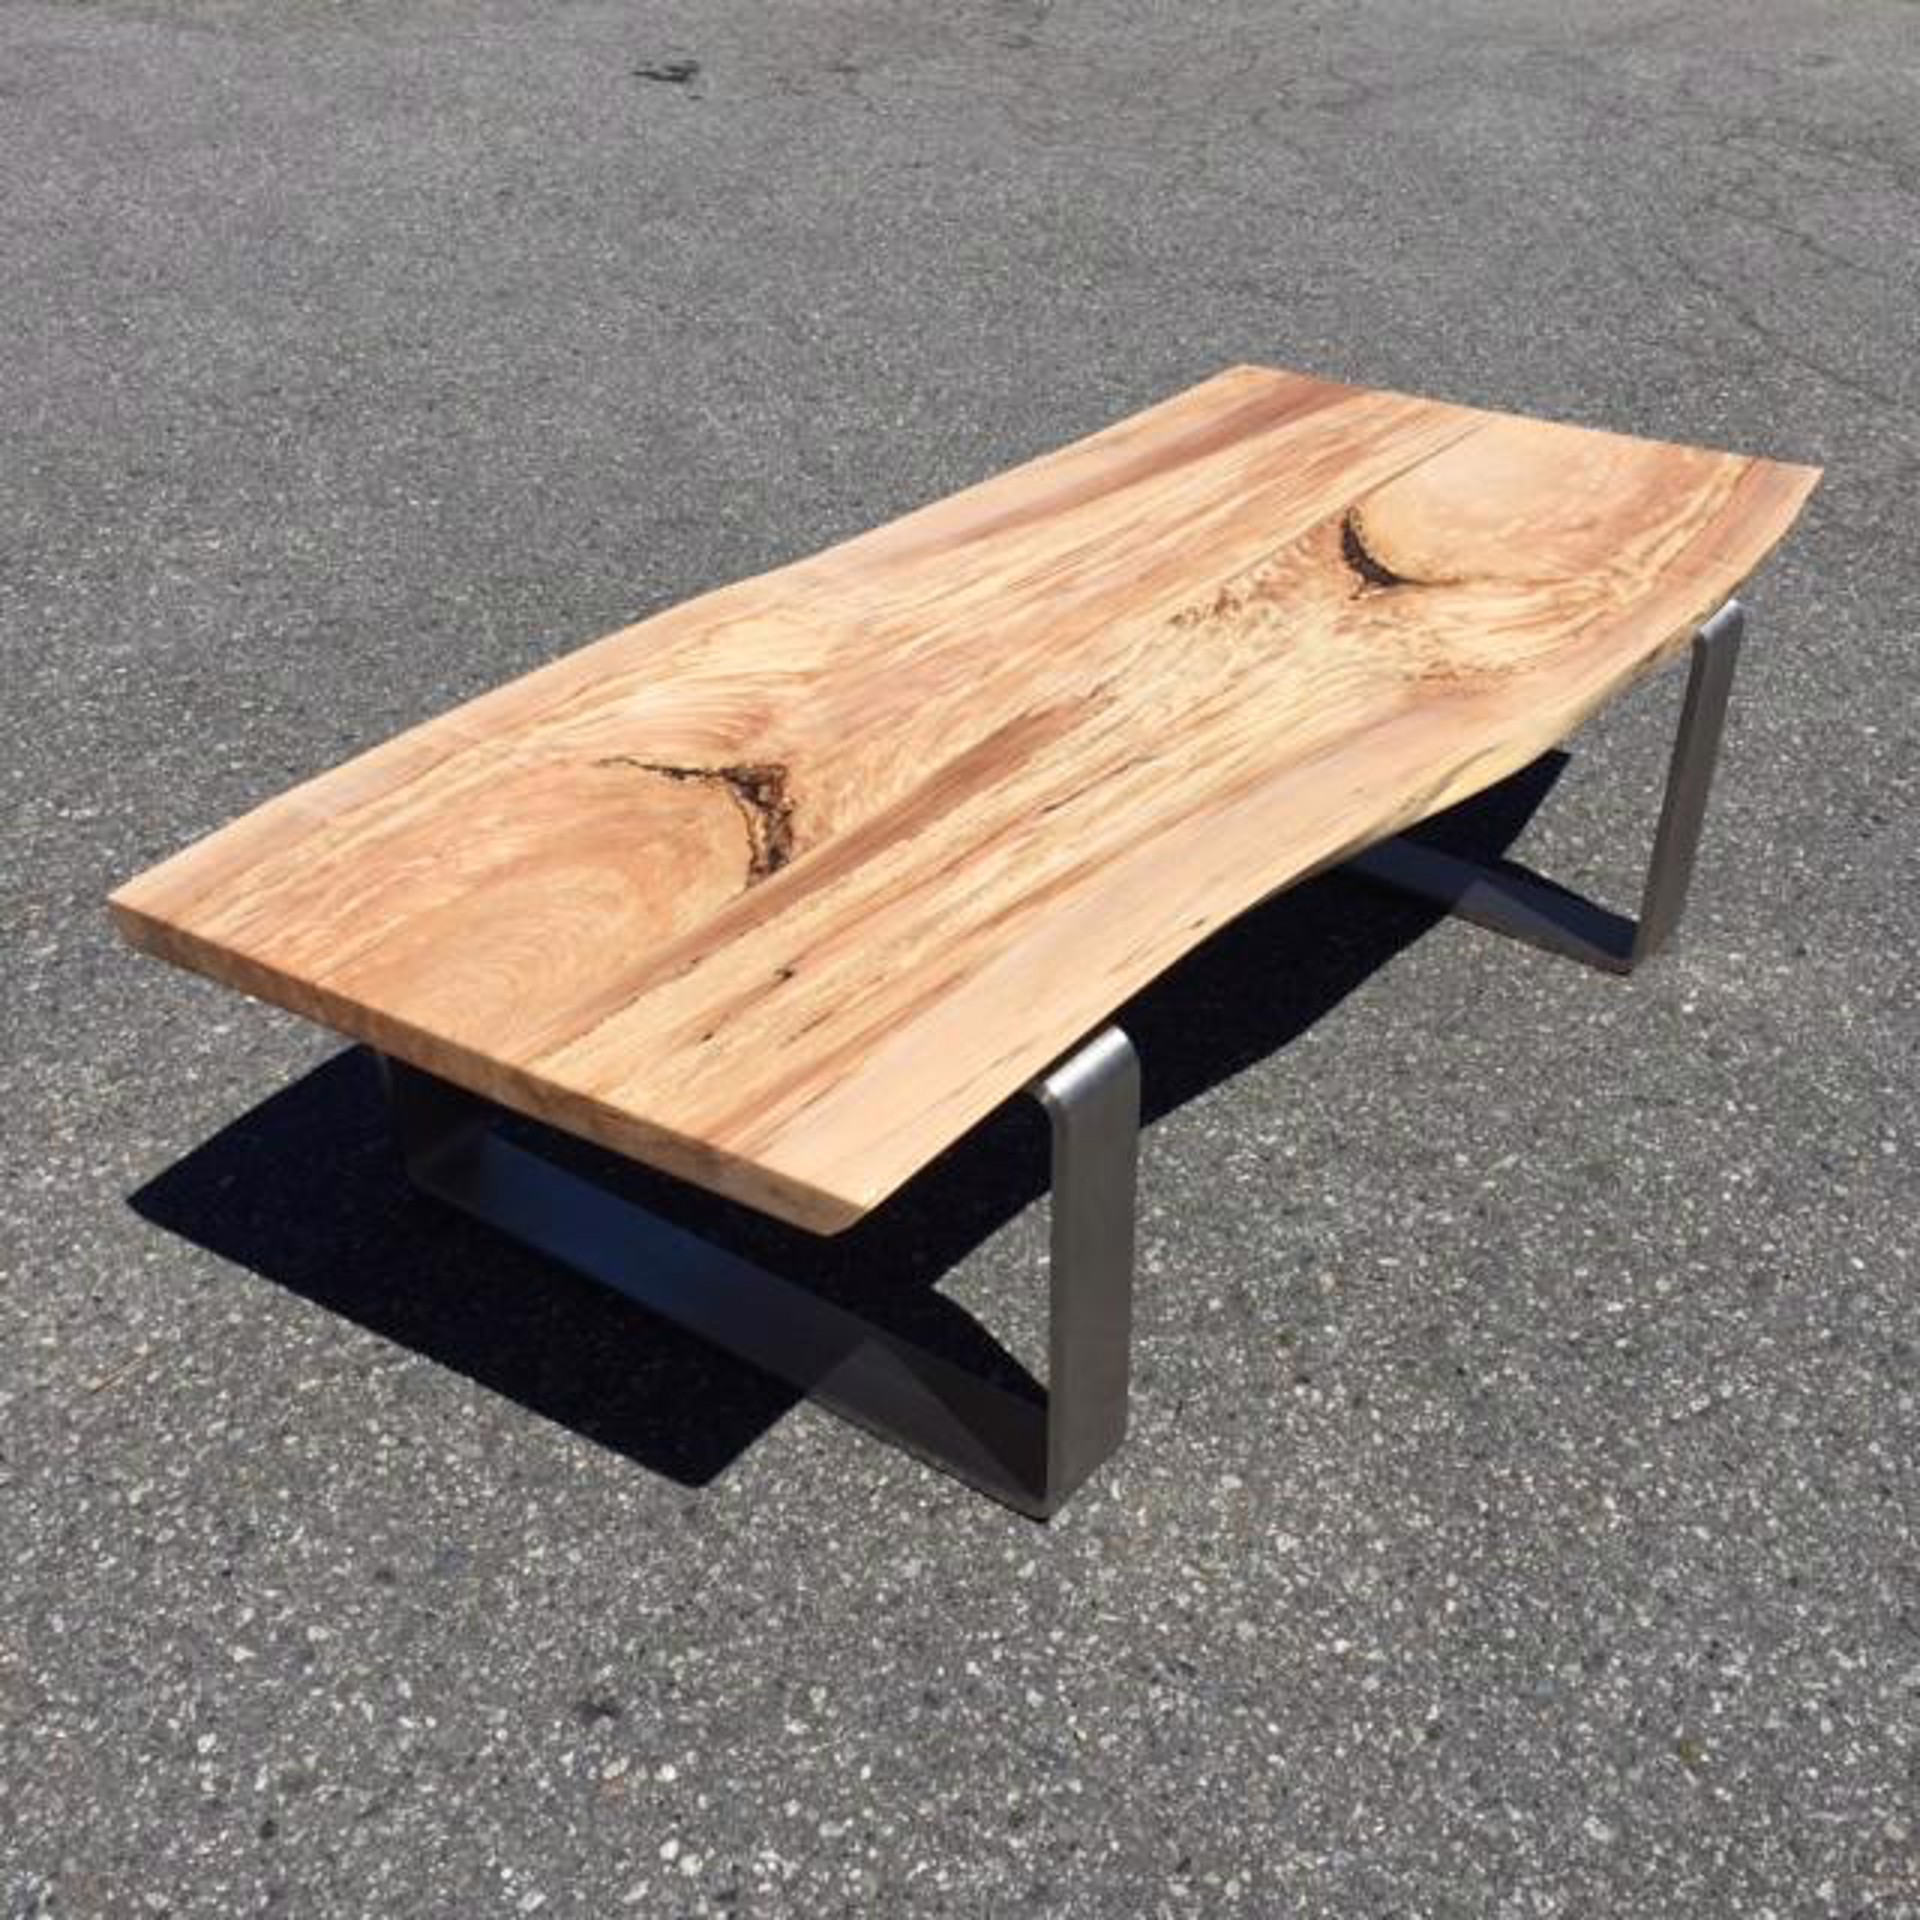 West Coast Modern Coffee Table - spalted by Benjamin McLaughlin